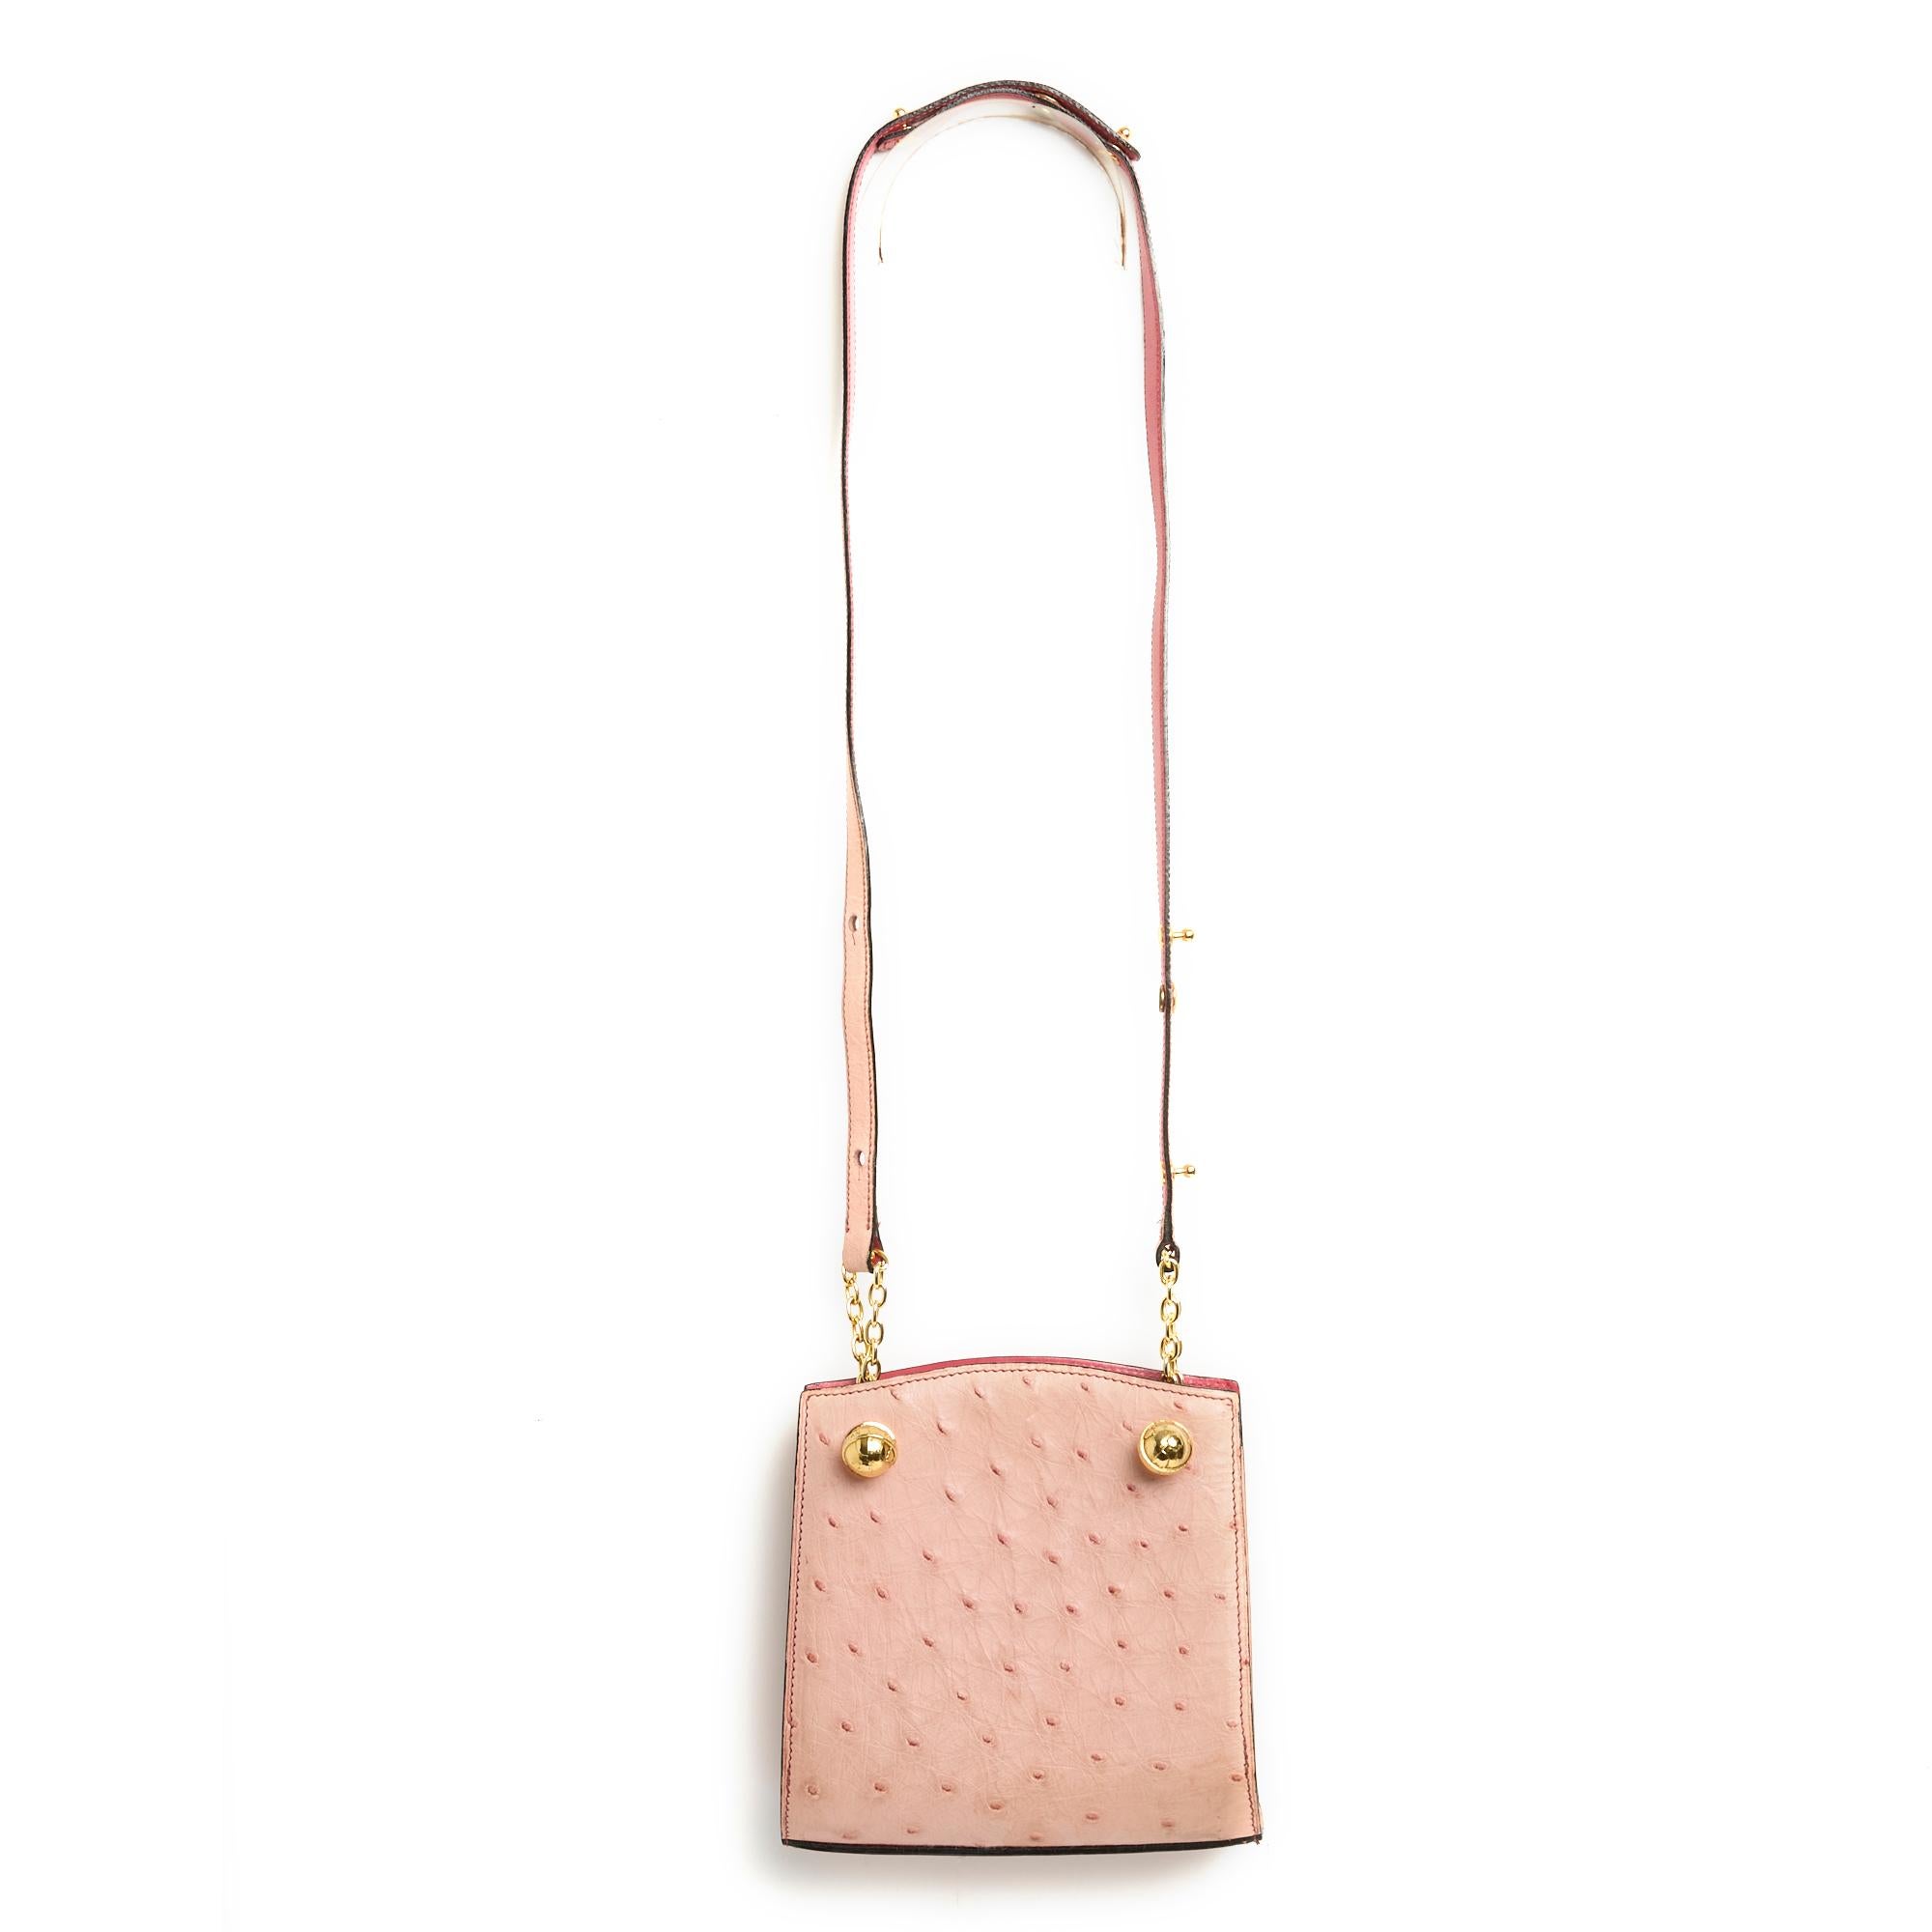 Small Jean-Claude Jitrois bag in pale pink ostrich leather, interior in bright pink leather with 2 compartments separated by a zipped pocket, shoulder strap to be worn short or long for shoulder or cross body wear held in place by 2 metal 